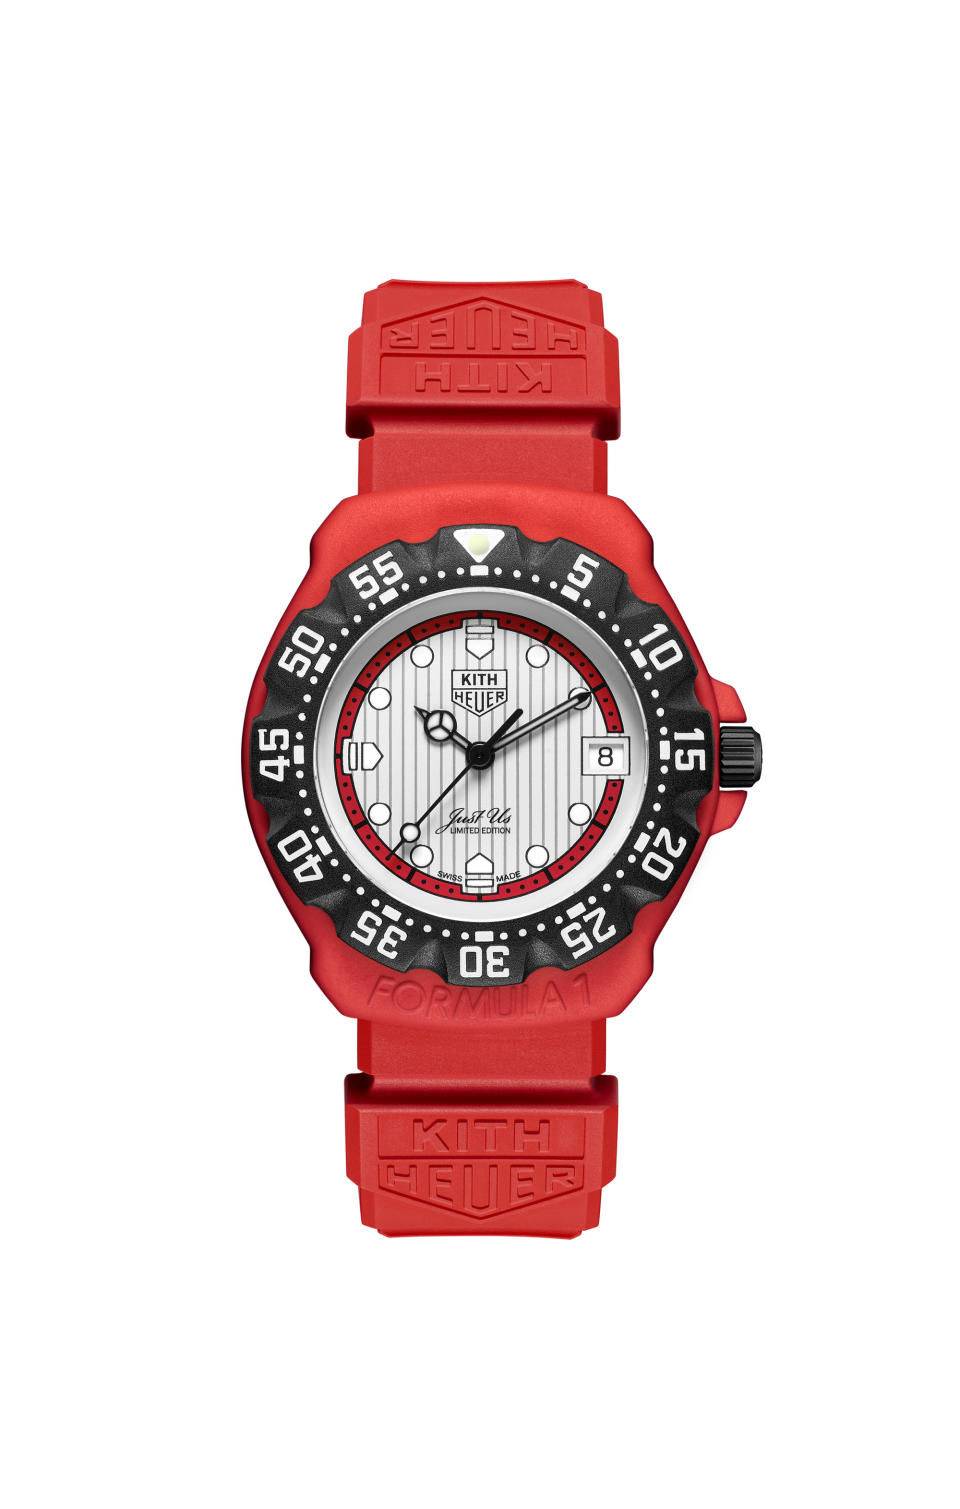 The Tag Heuer Formula 1 Kith in red and black echoes the watch Fieg owned as a teen.